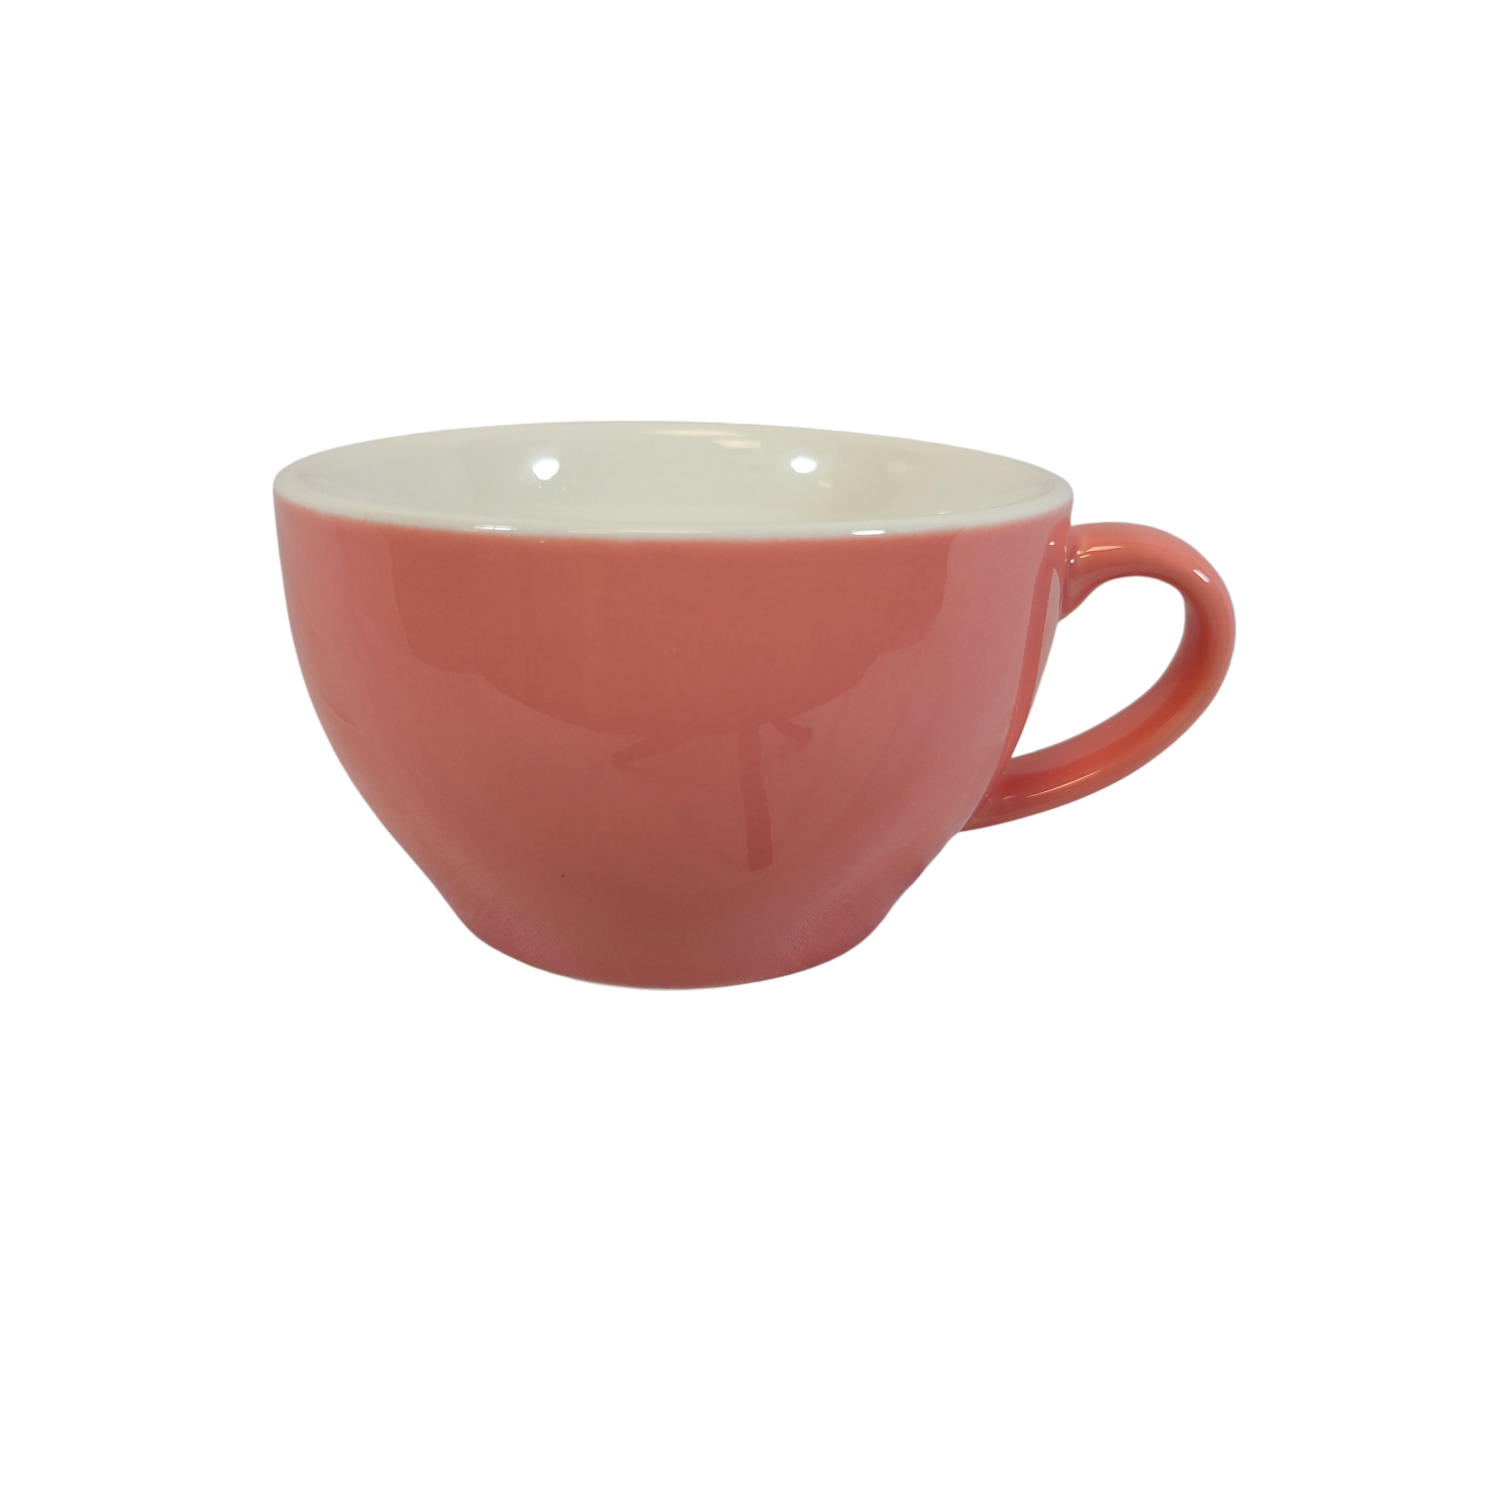 Coffee Addicts commercial ceramic cup in glossy pink latte cappuccino cup 8oz 250ml